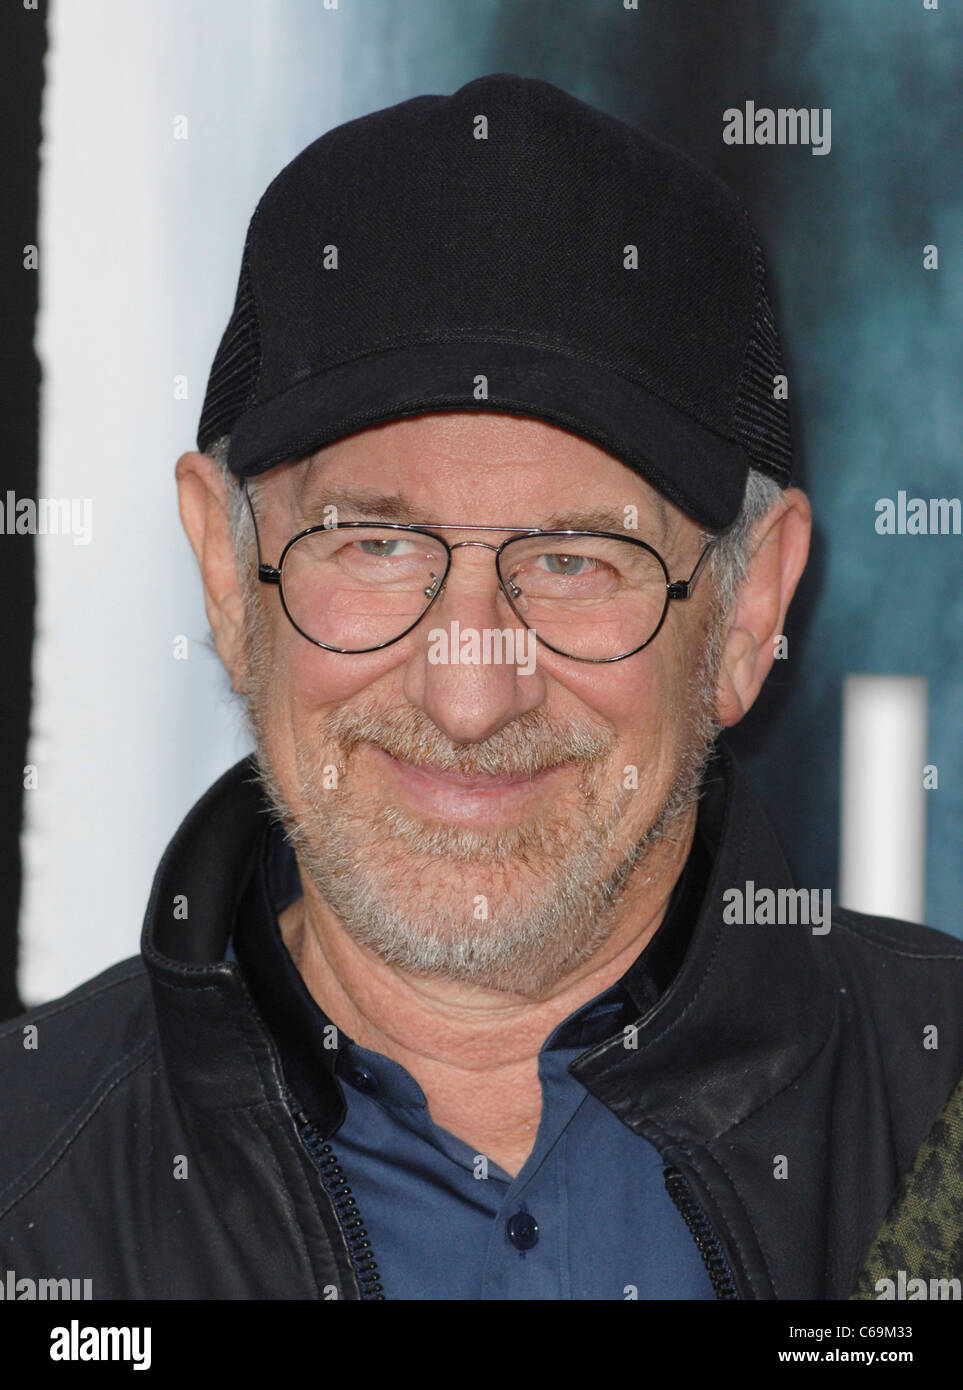 Steven Spielberg at arrivals for SUPER 8 Premiere, Regency Village Theater, Los Angeles, CA June 8, 2011. Photo By: Elizabeth Goodenough/Everett Collection Stock Photo